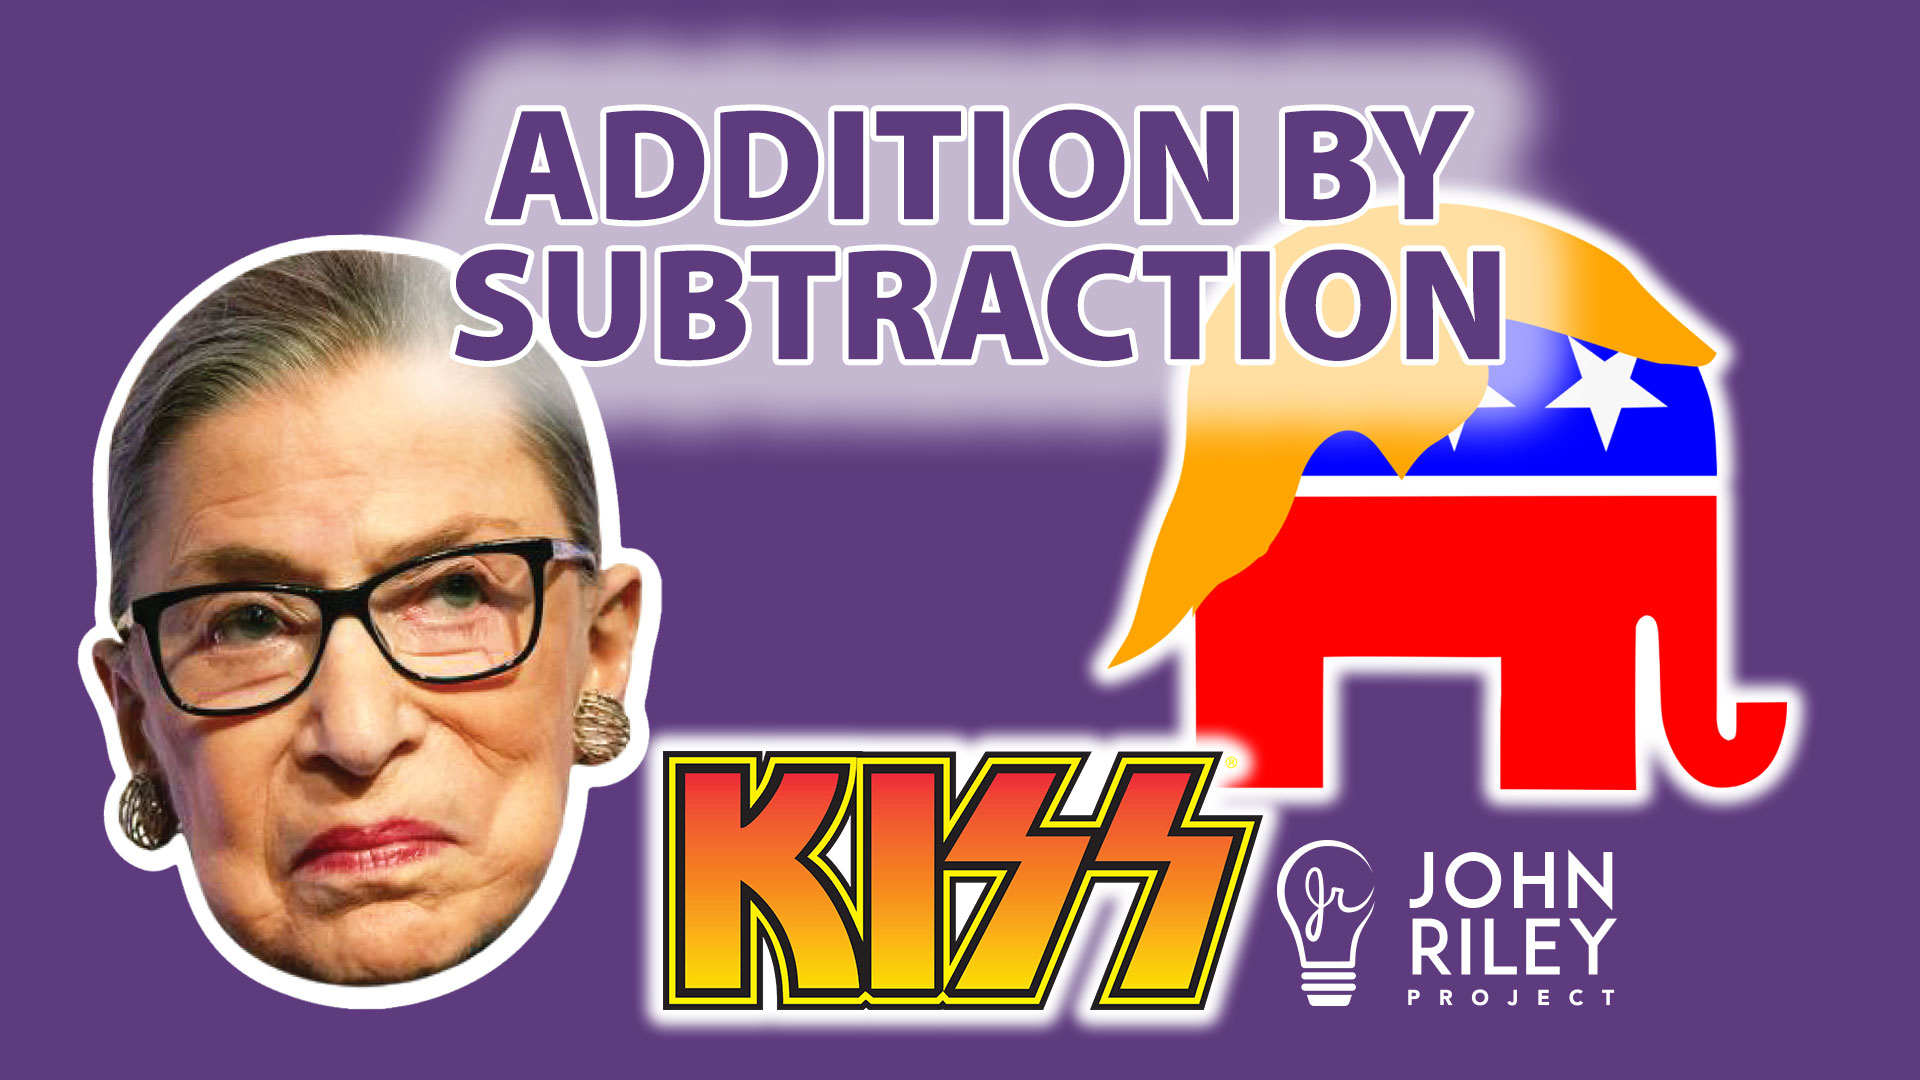 RBG, Ruth Bader Ginsburg, GOP, SCOTUS, Addition by Subtraction, John Riley Project, JRP0165